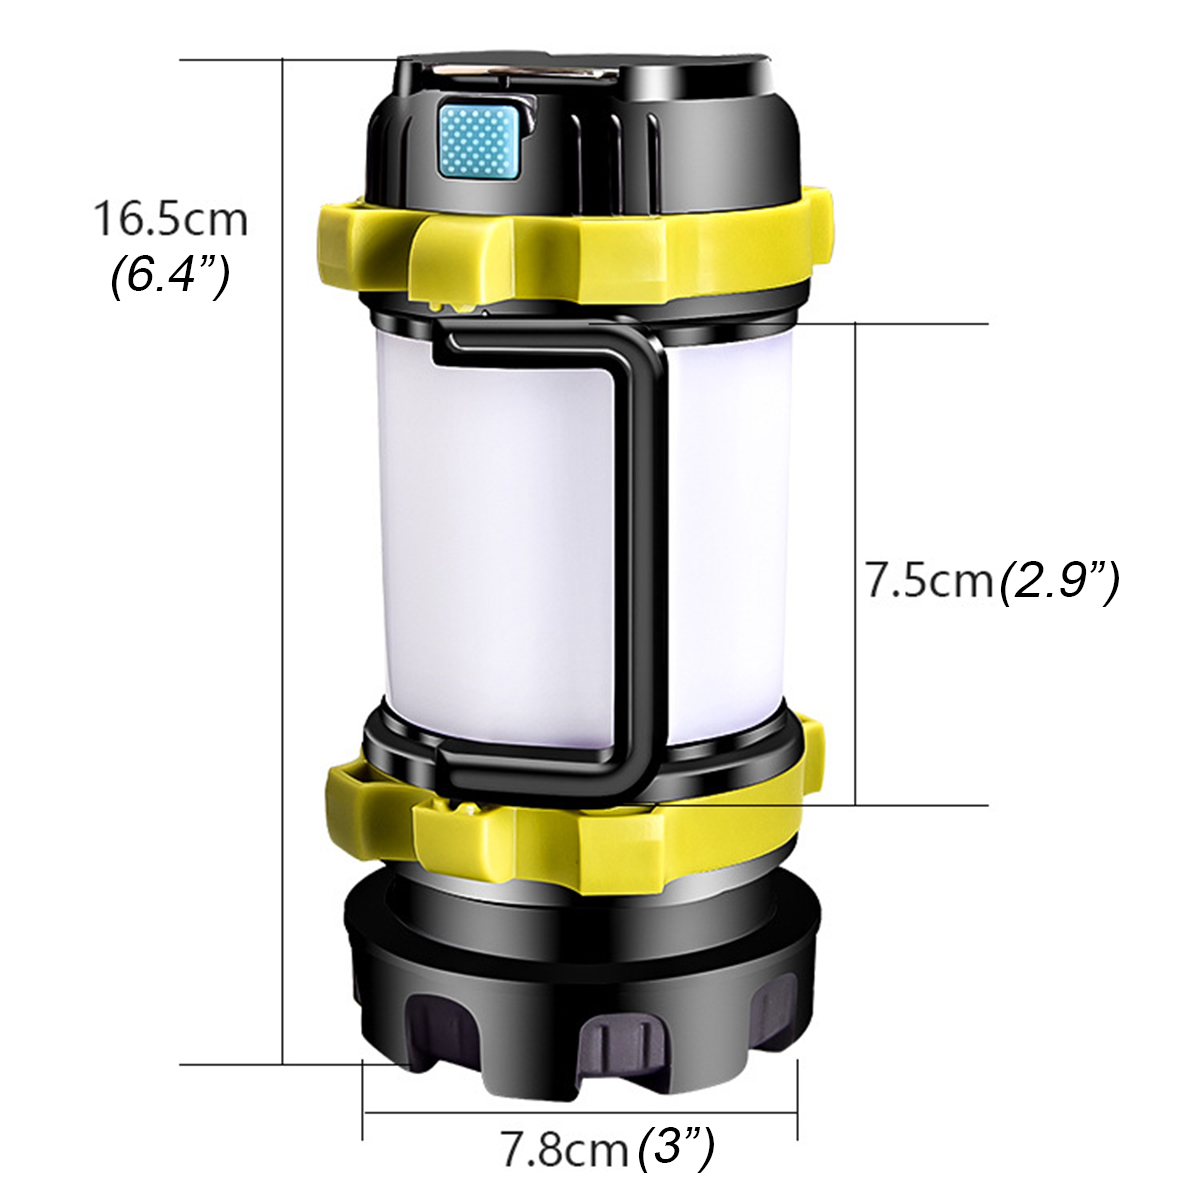 LED-Flashlight-Camping-Light-Torch-Lantern-USB-Rechargeable-USB-Charger-Worklight-Waterproof-1612111-8